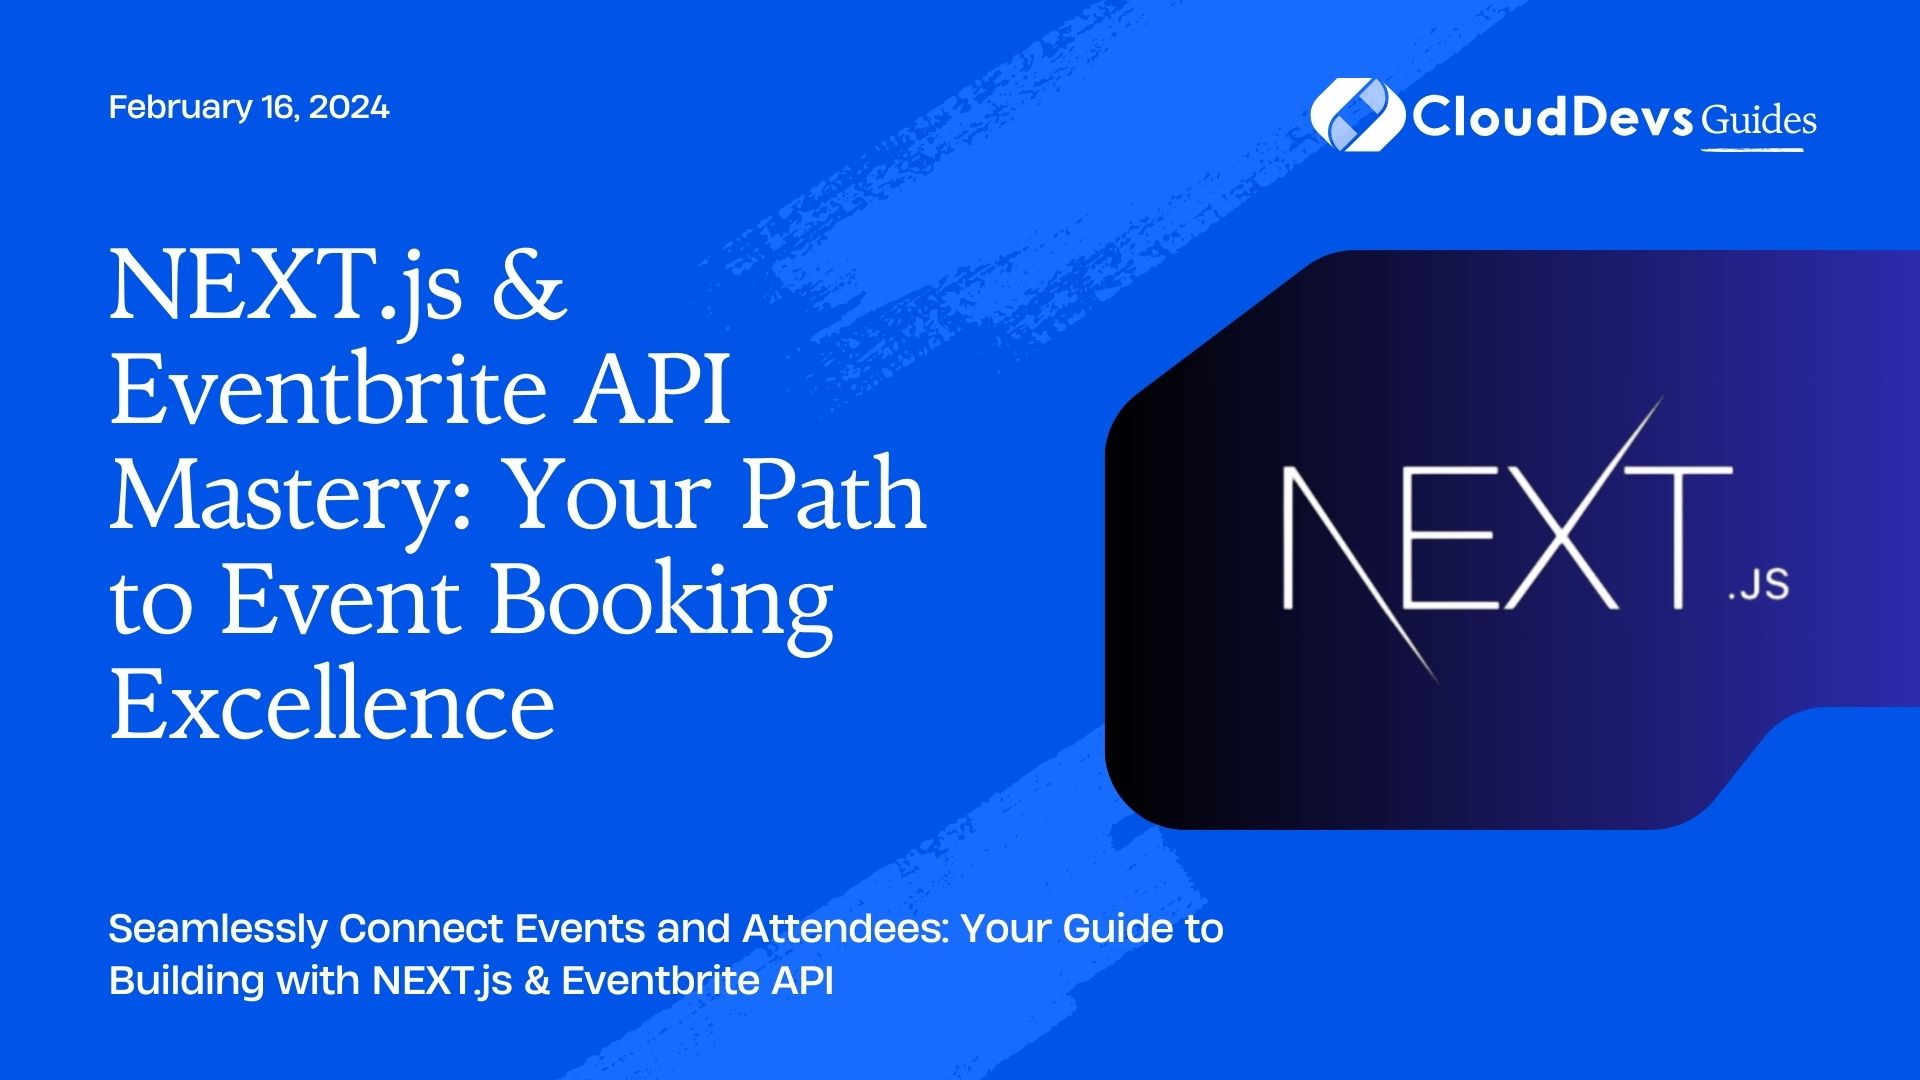 NEXT.js & Eventbrite API Mastery: Your Path to Event Booking Excellence